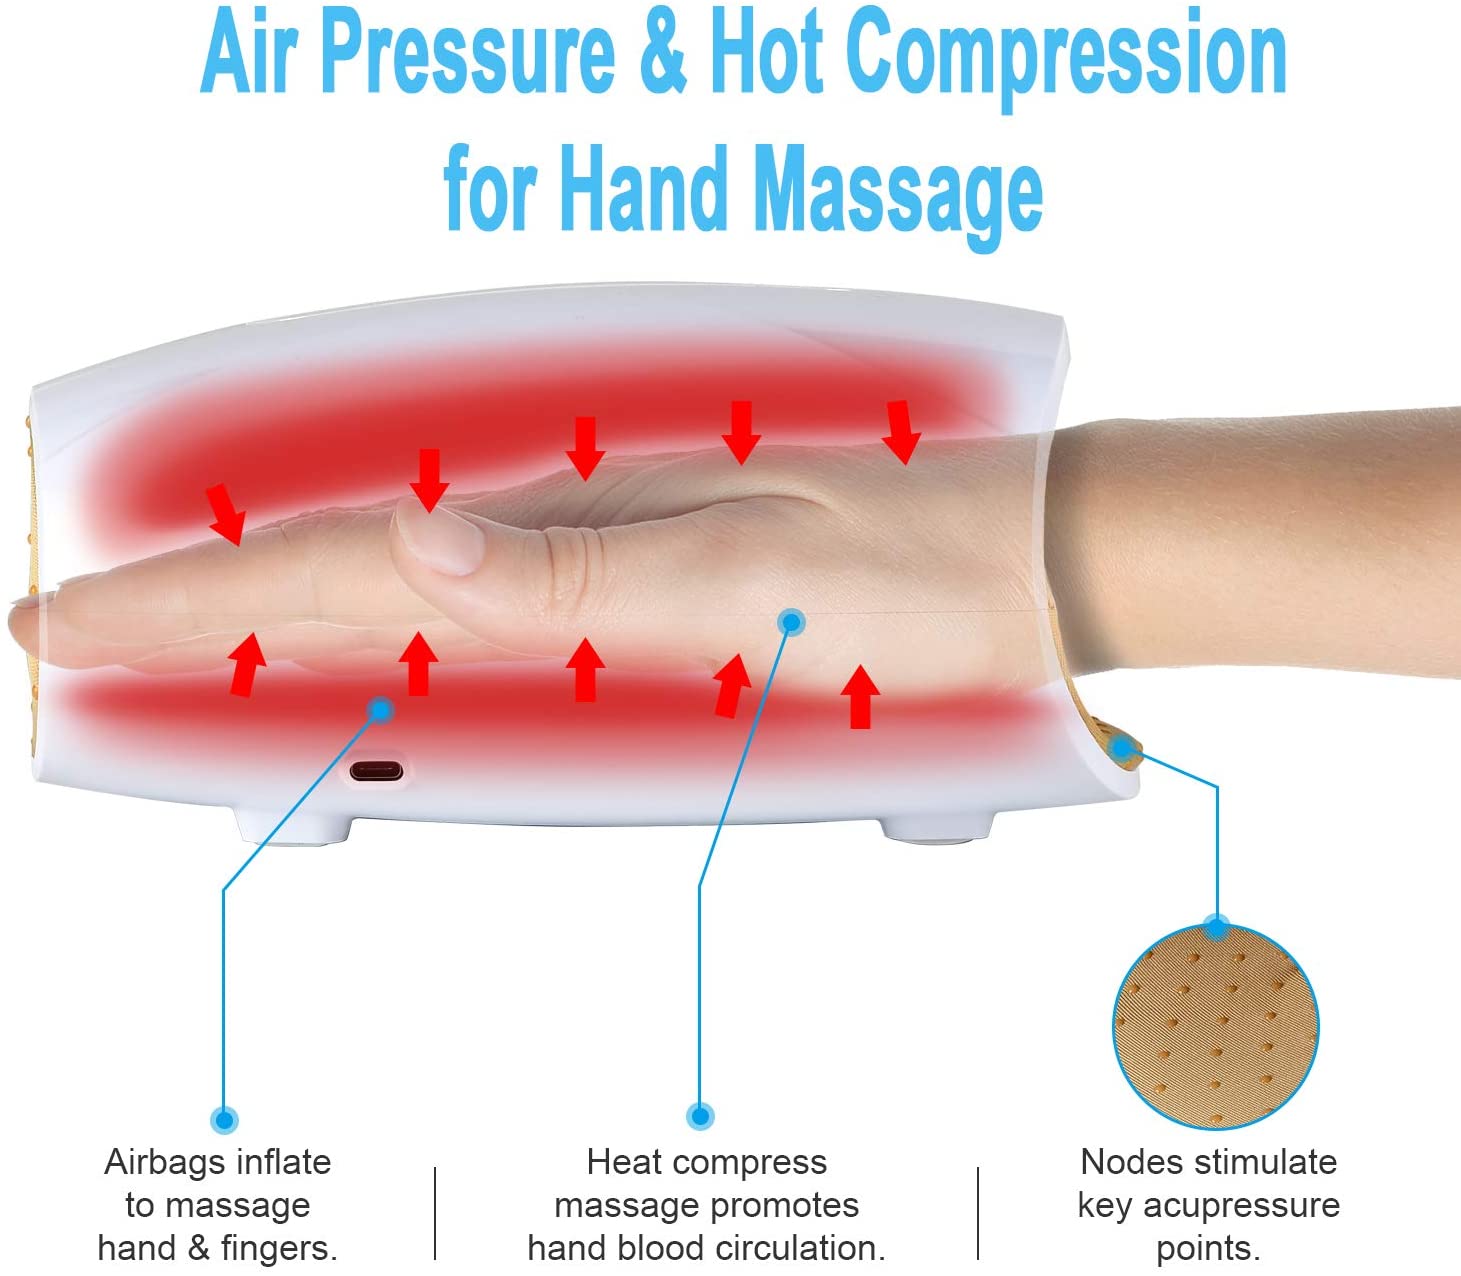 Electric Hand Massager for Palm Massage, Cordless Accupressure Massager Compress/Heat/Rechargeable for Arthritis